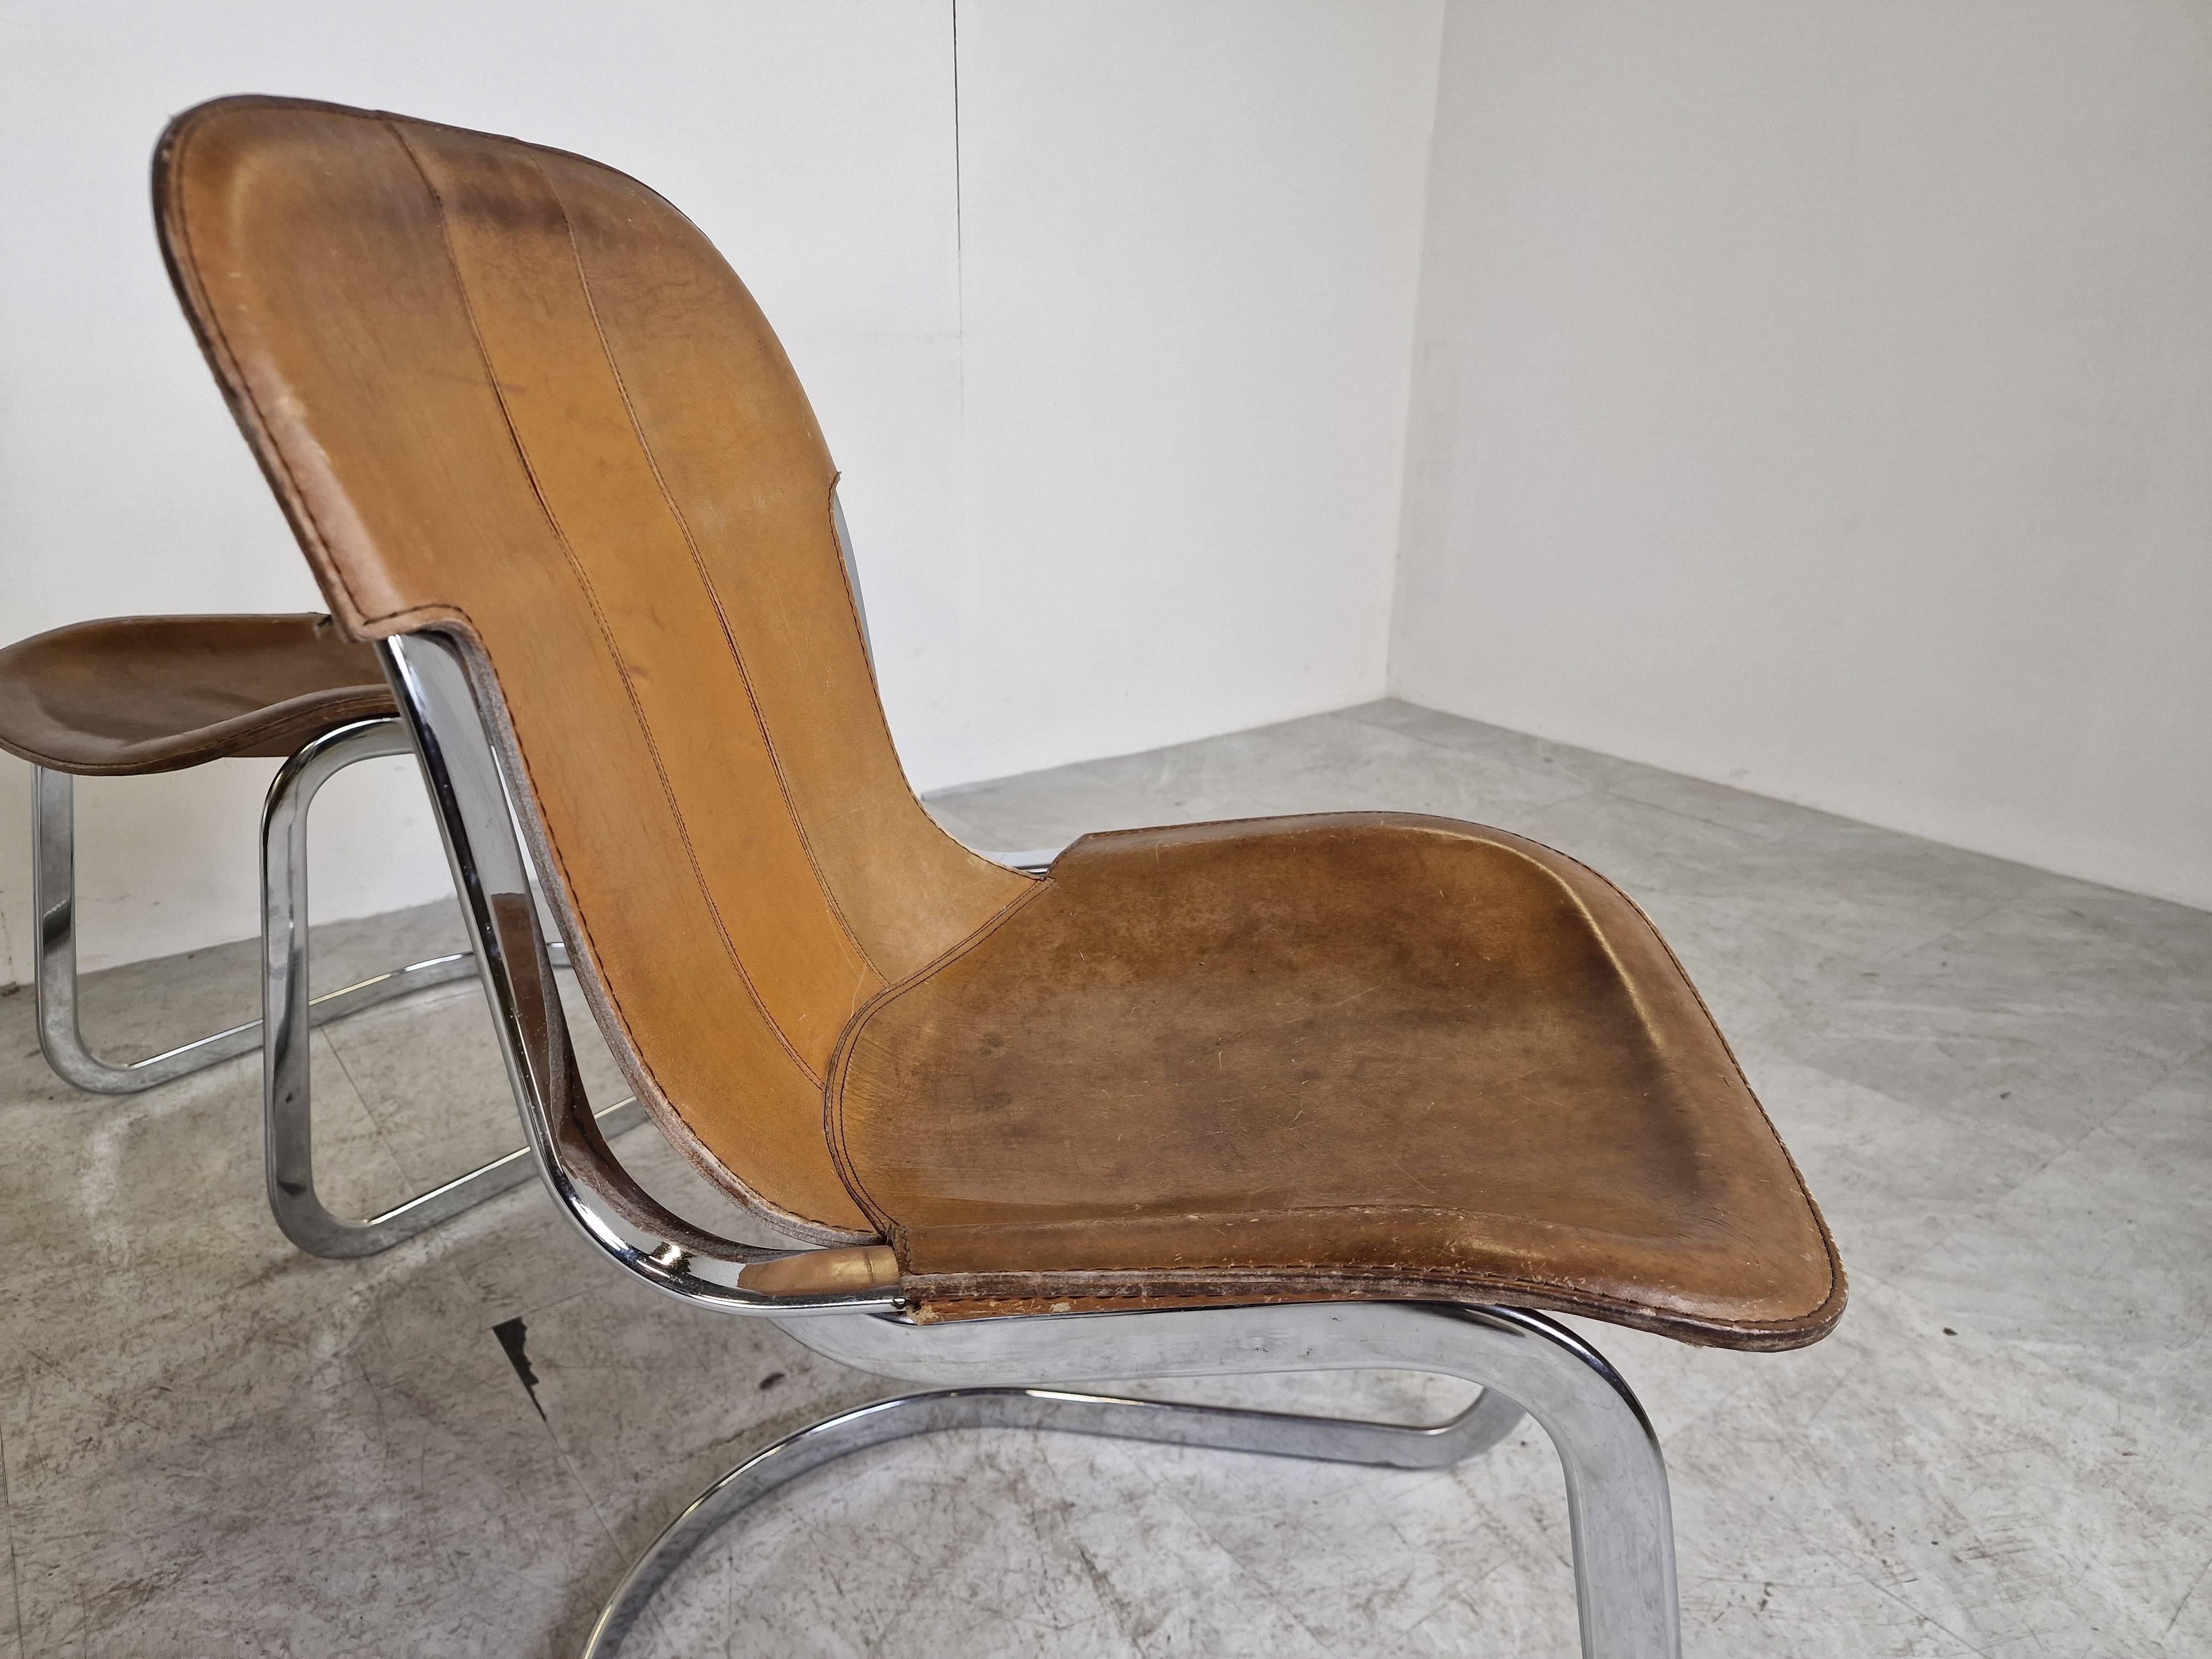 Set of 8 dining chairs designed by Willy Rizzo for Cidue.

The chairs have a beautyfully shaped chrome frame and come with the original tan leather seats.

Used condition, leather shows wear, but still look very attractive. Frames have been